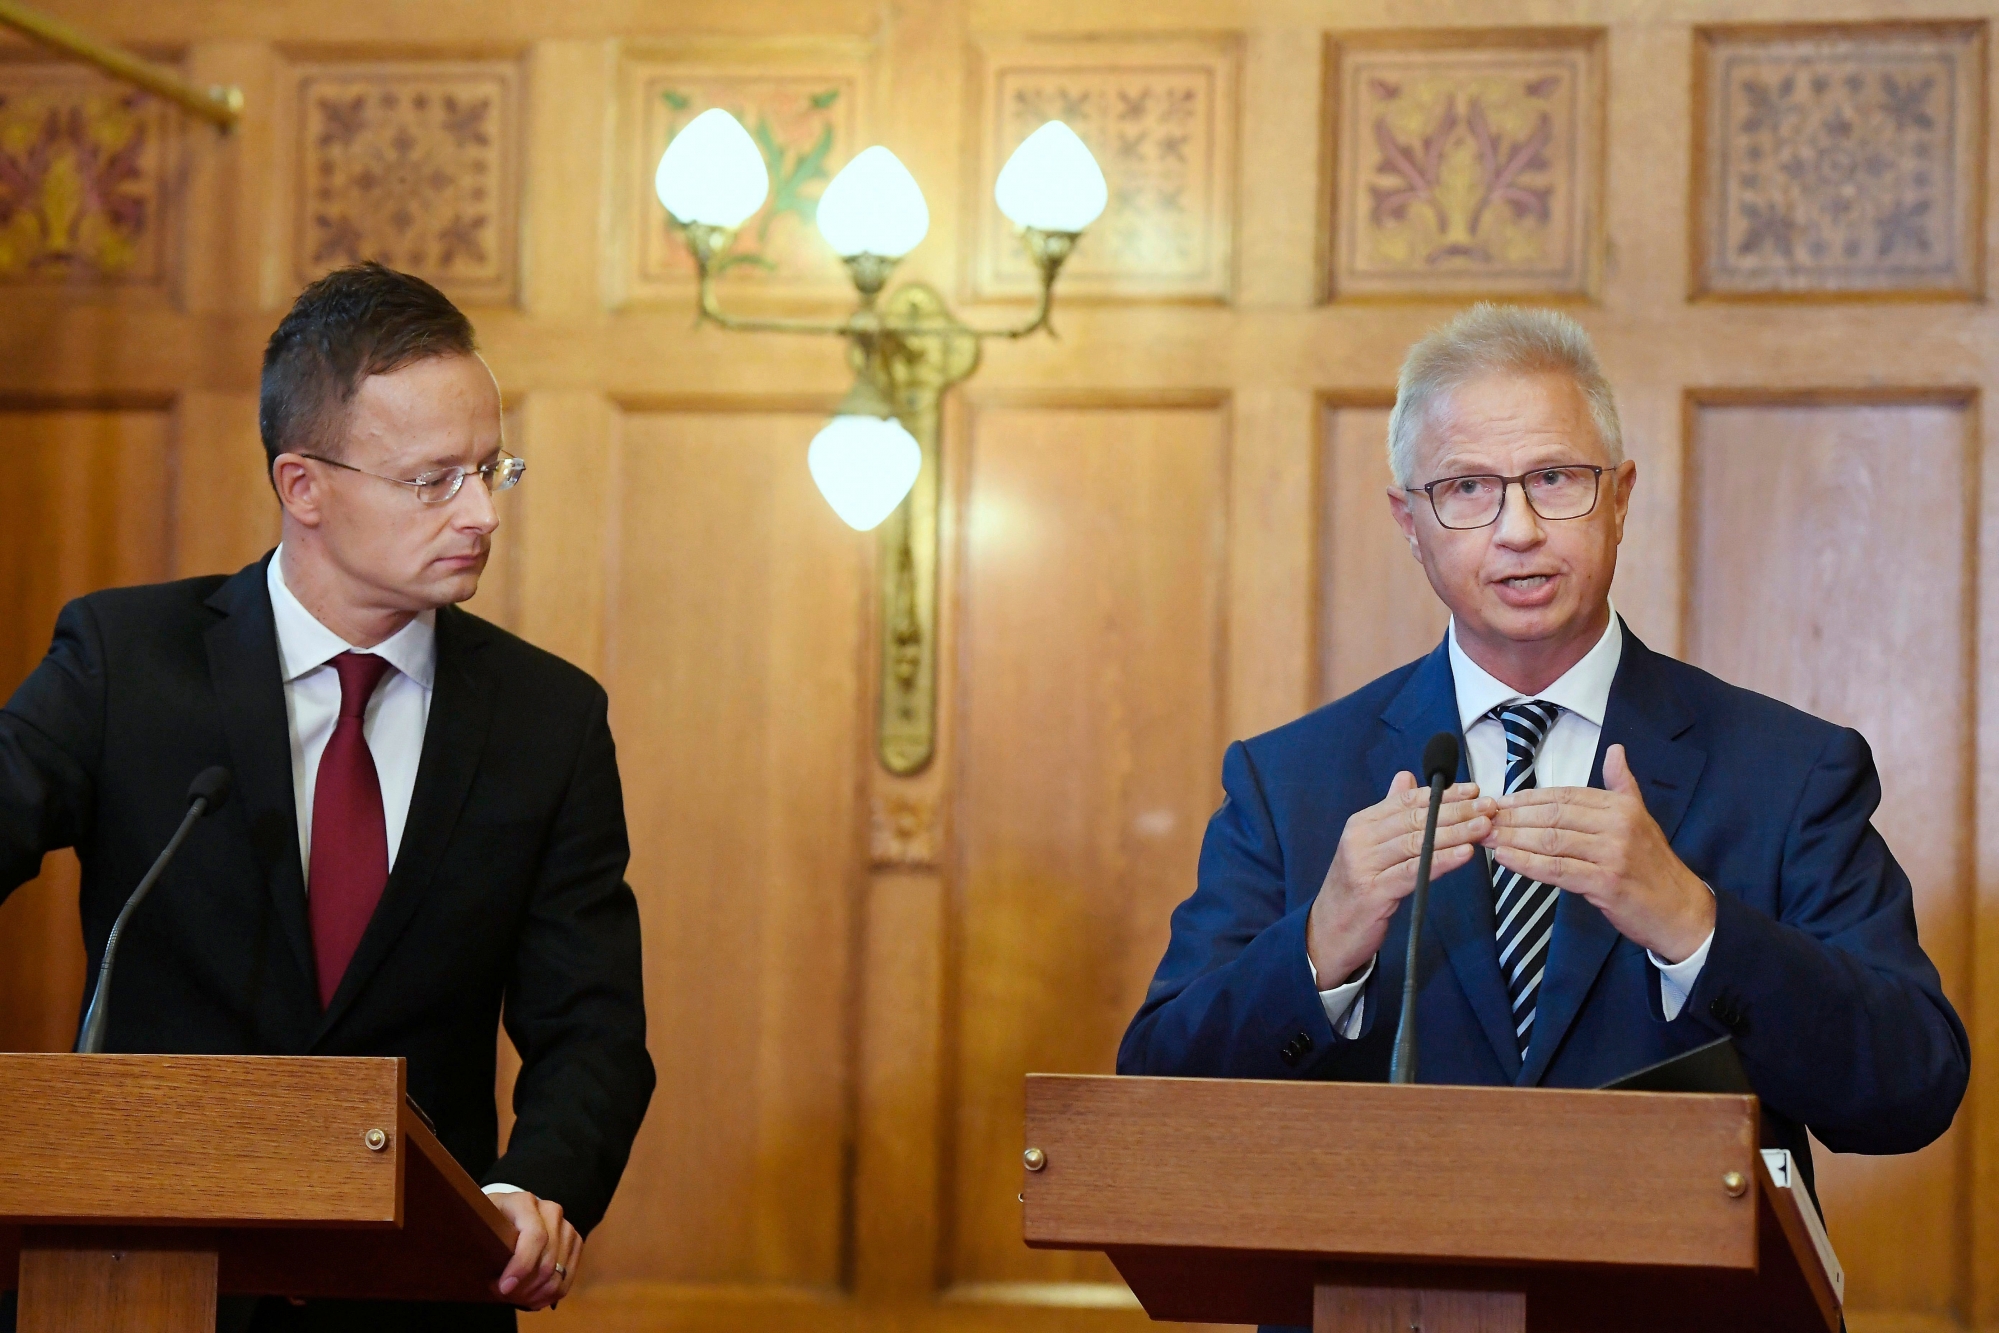 Hungarian Minister of Foreign Affairs and Trade Peter Szijjarto, right, and Hungarian Justice Minister Laszlo Trocsanyi hold a joint news conference after the decision of the Court of Justice of Luxembourg about the EU migrant quotas at the Parliament in Budapest, Hungary, Wednesday, Sept. 6, 2017. (Szilard Koszticsak/MTI via AP) Europe Migrants